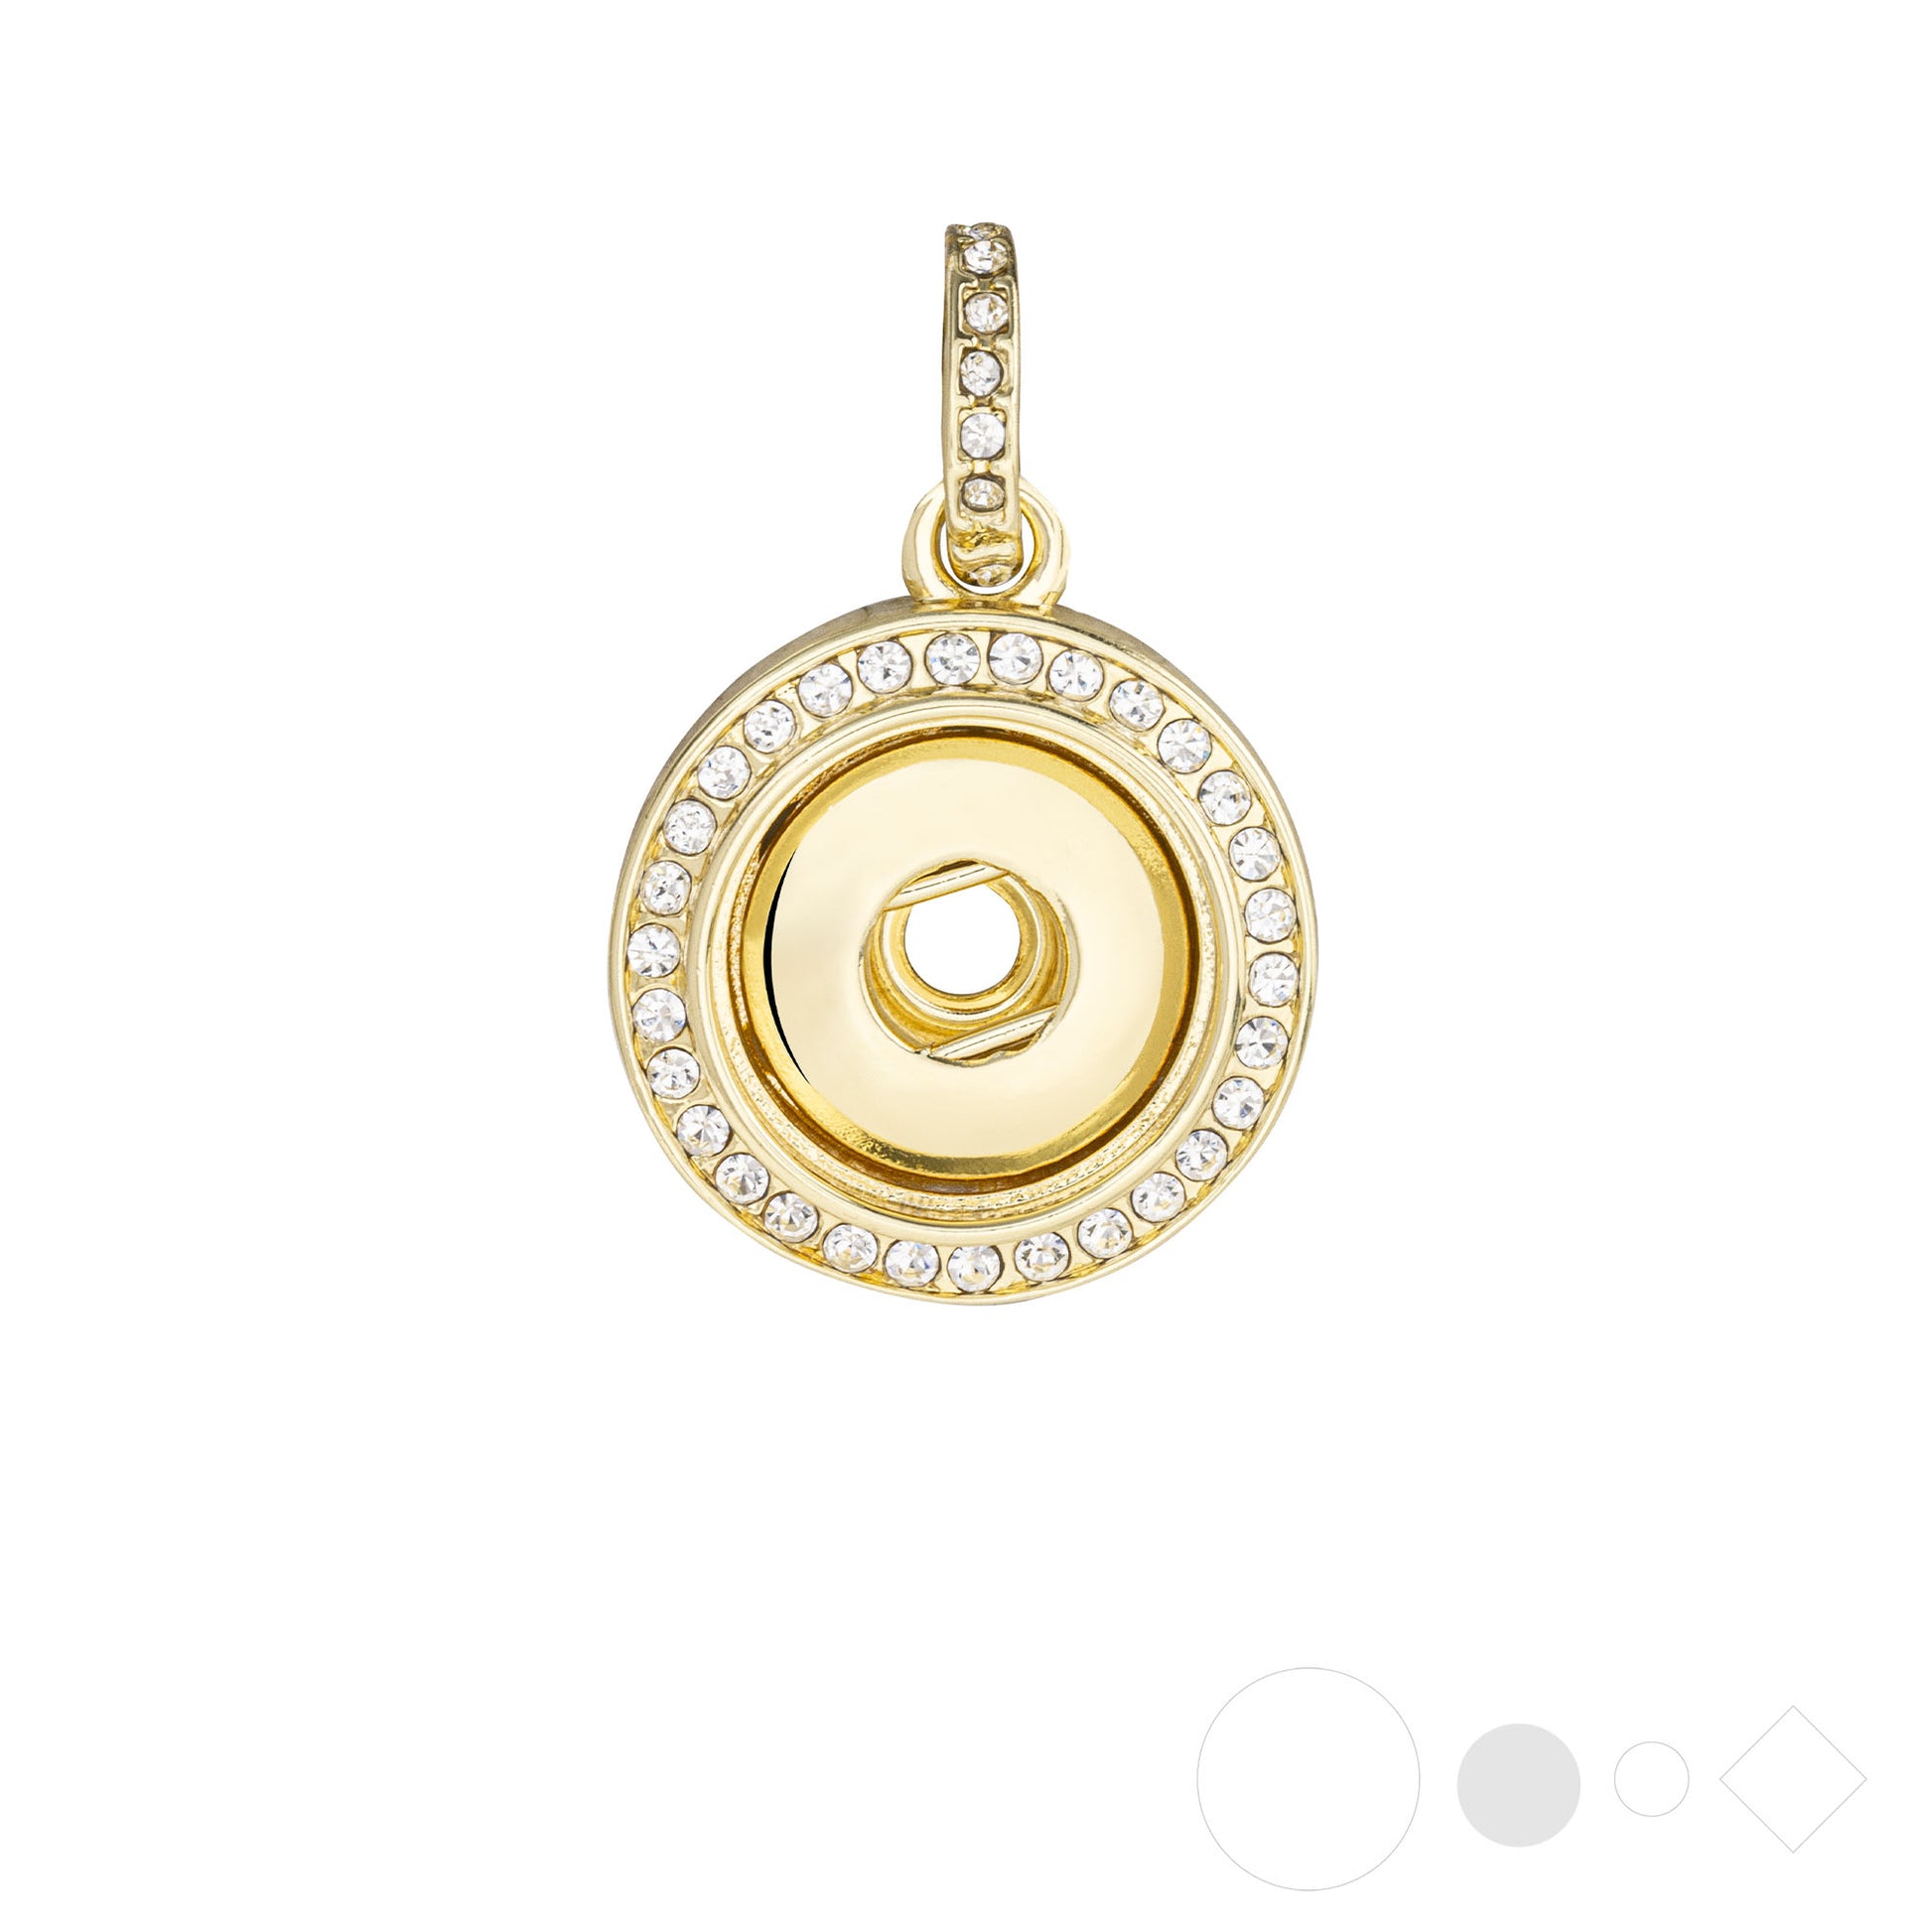 Gold pendant necklace for interchangeable snap jewelry